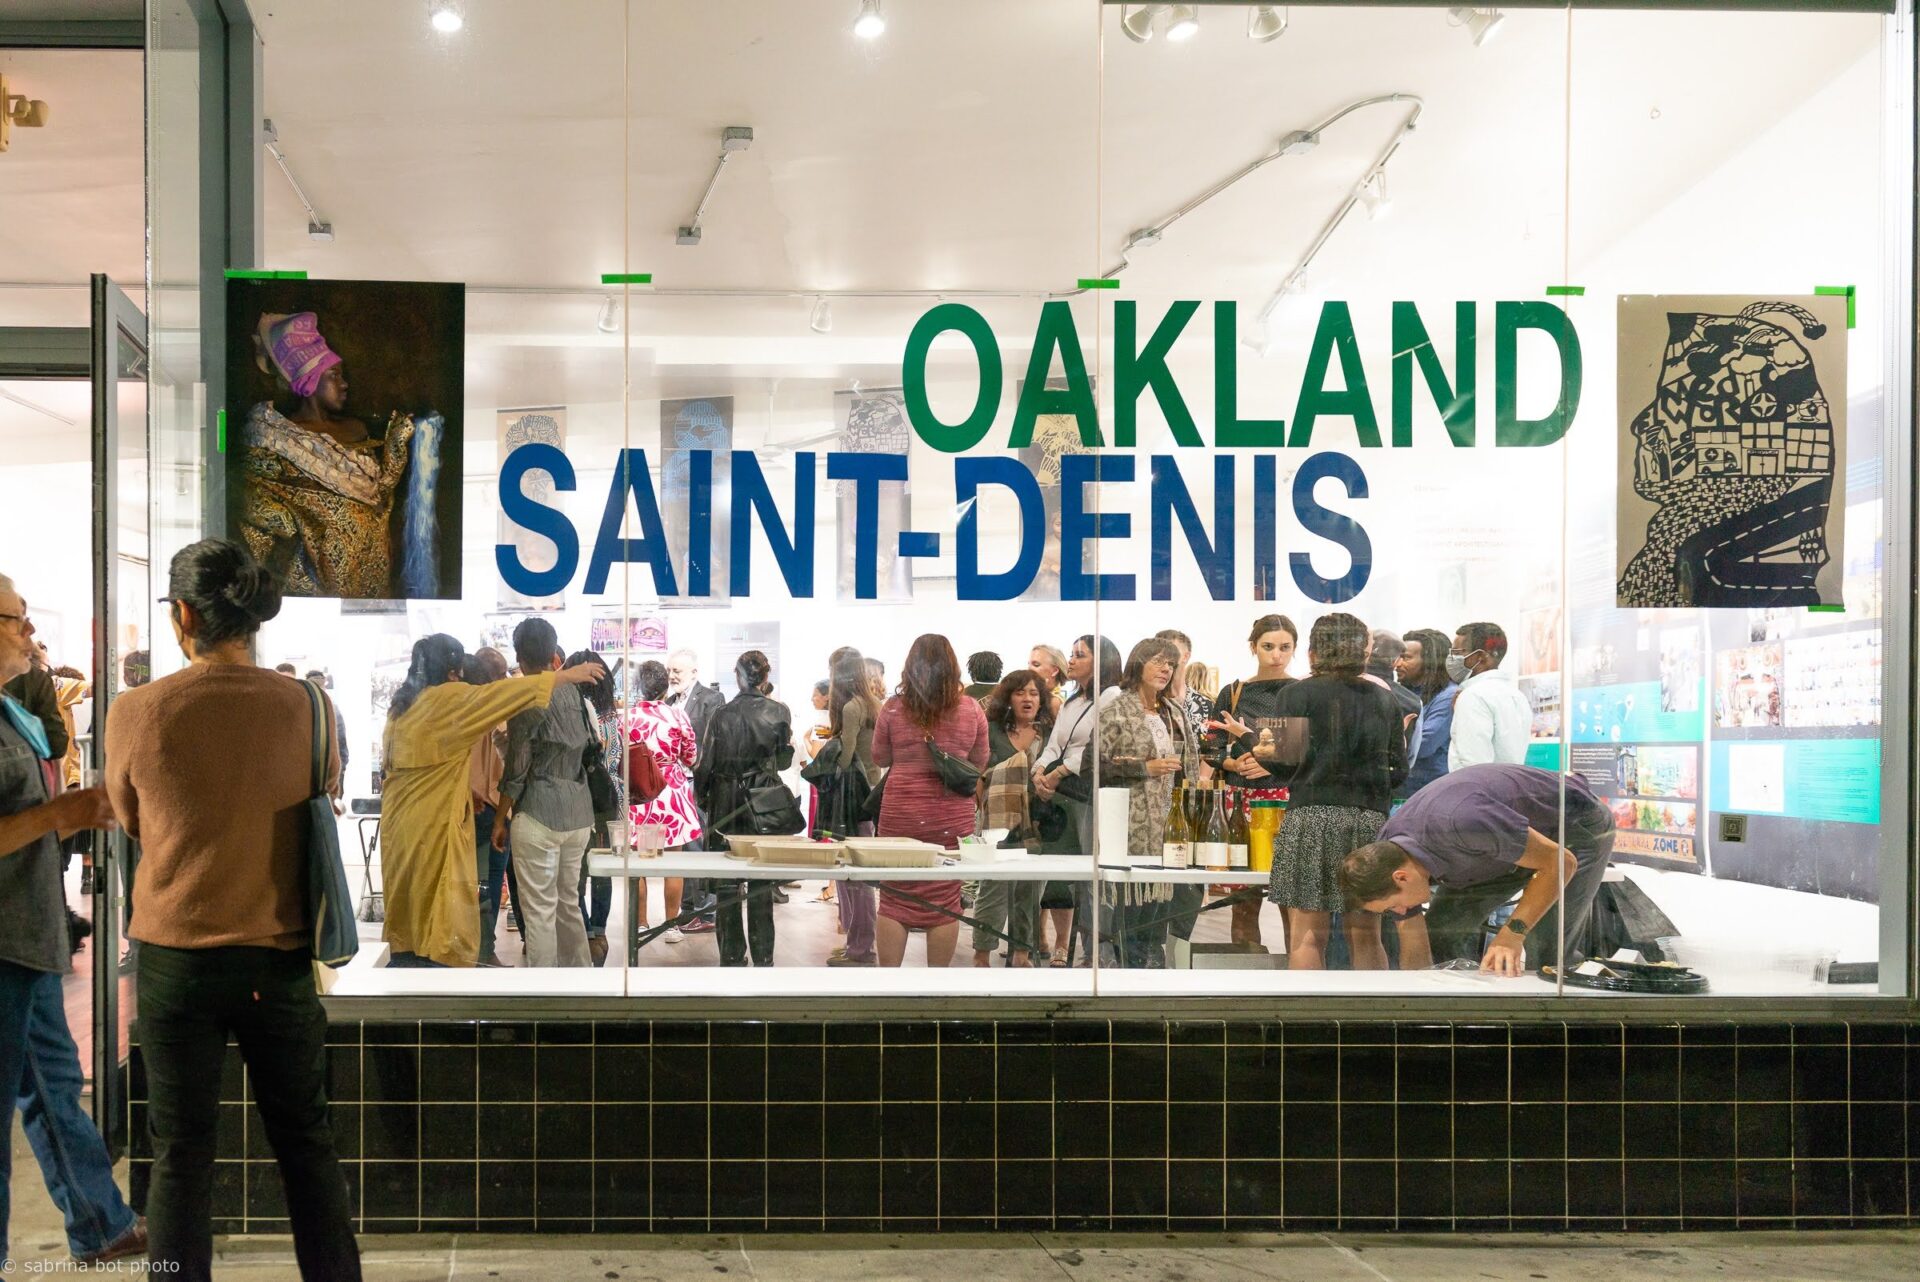 Release of “Empowering Culture in Our Cities”, a Documentary on Oakland and Saint-Denis